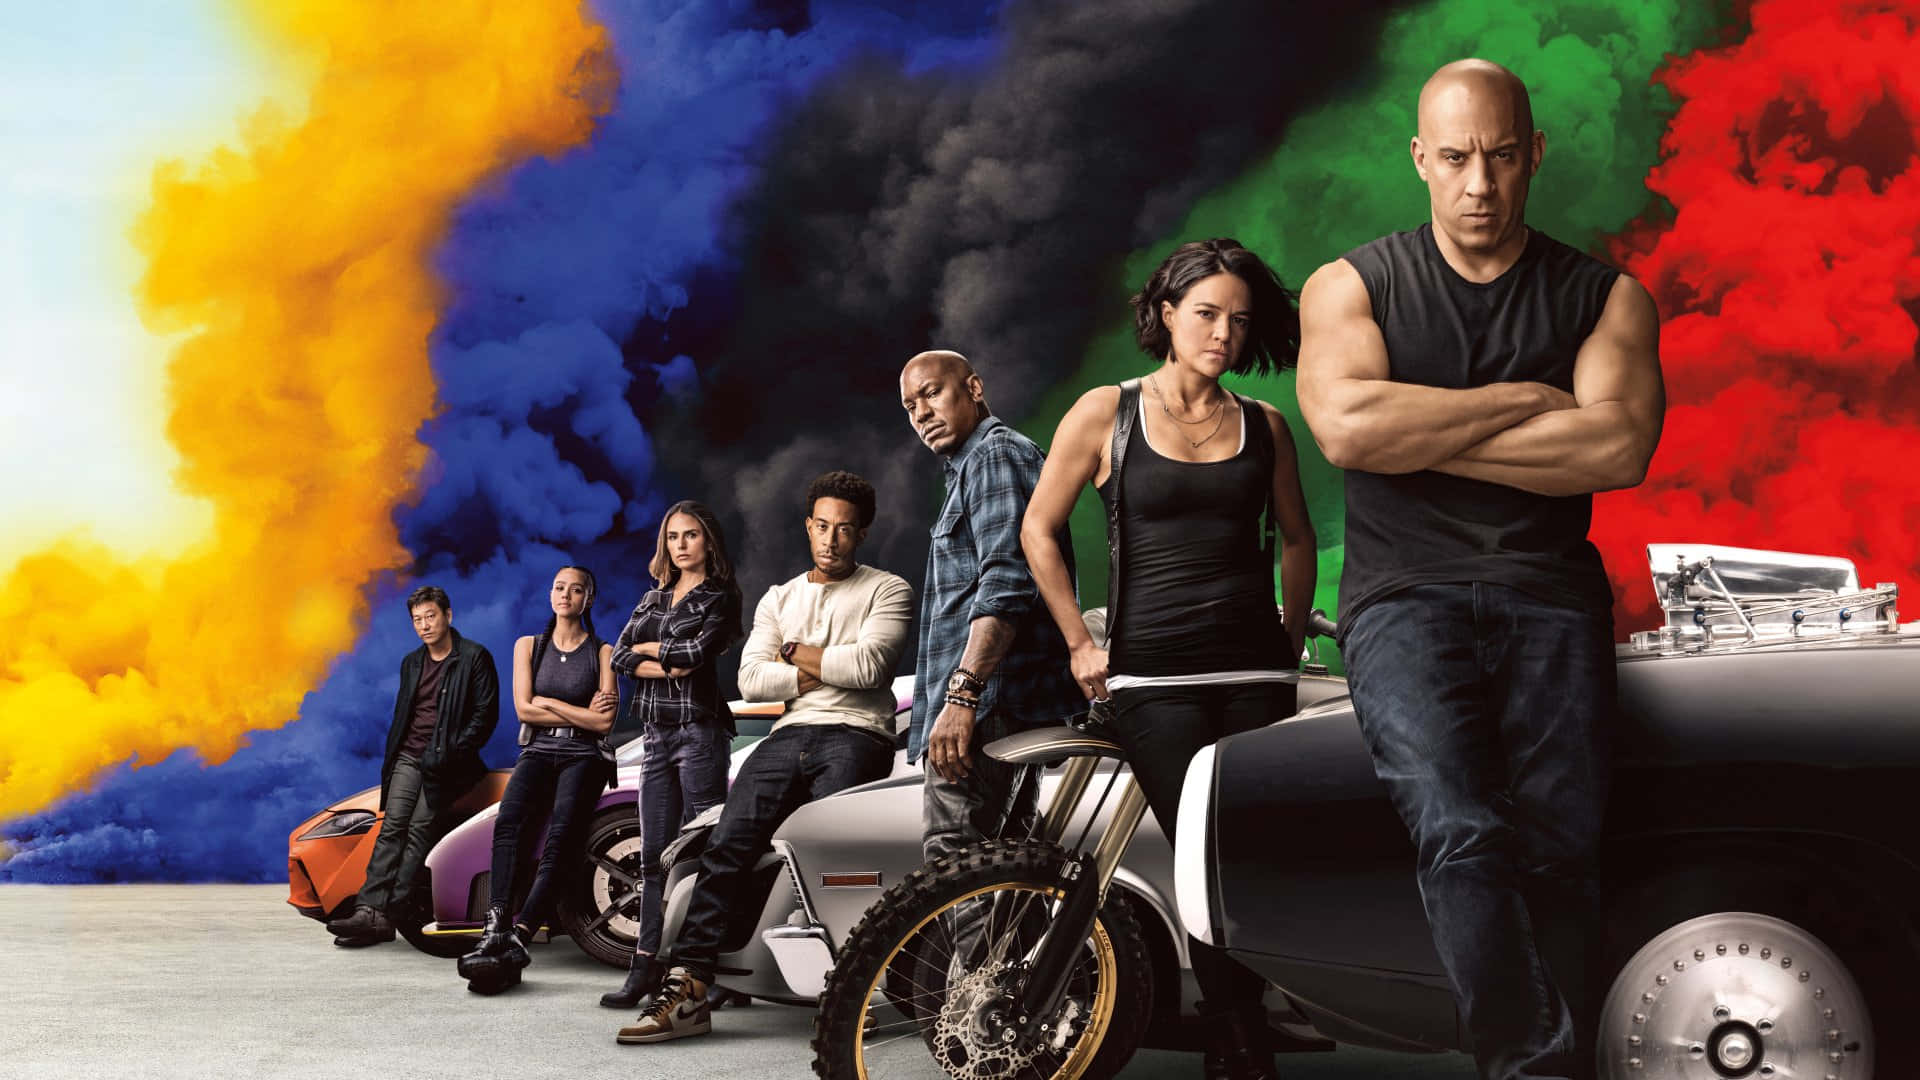 Neueautos, Neue Stunts, Dasselbe Fast And Furious-franchise! Wallpaper